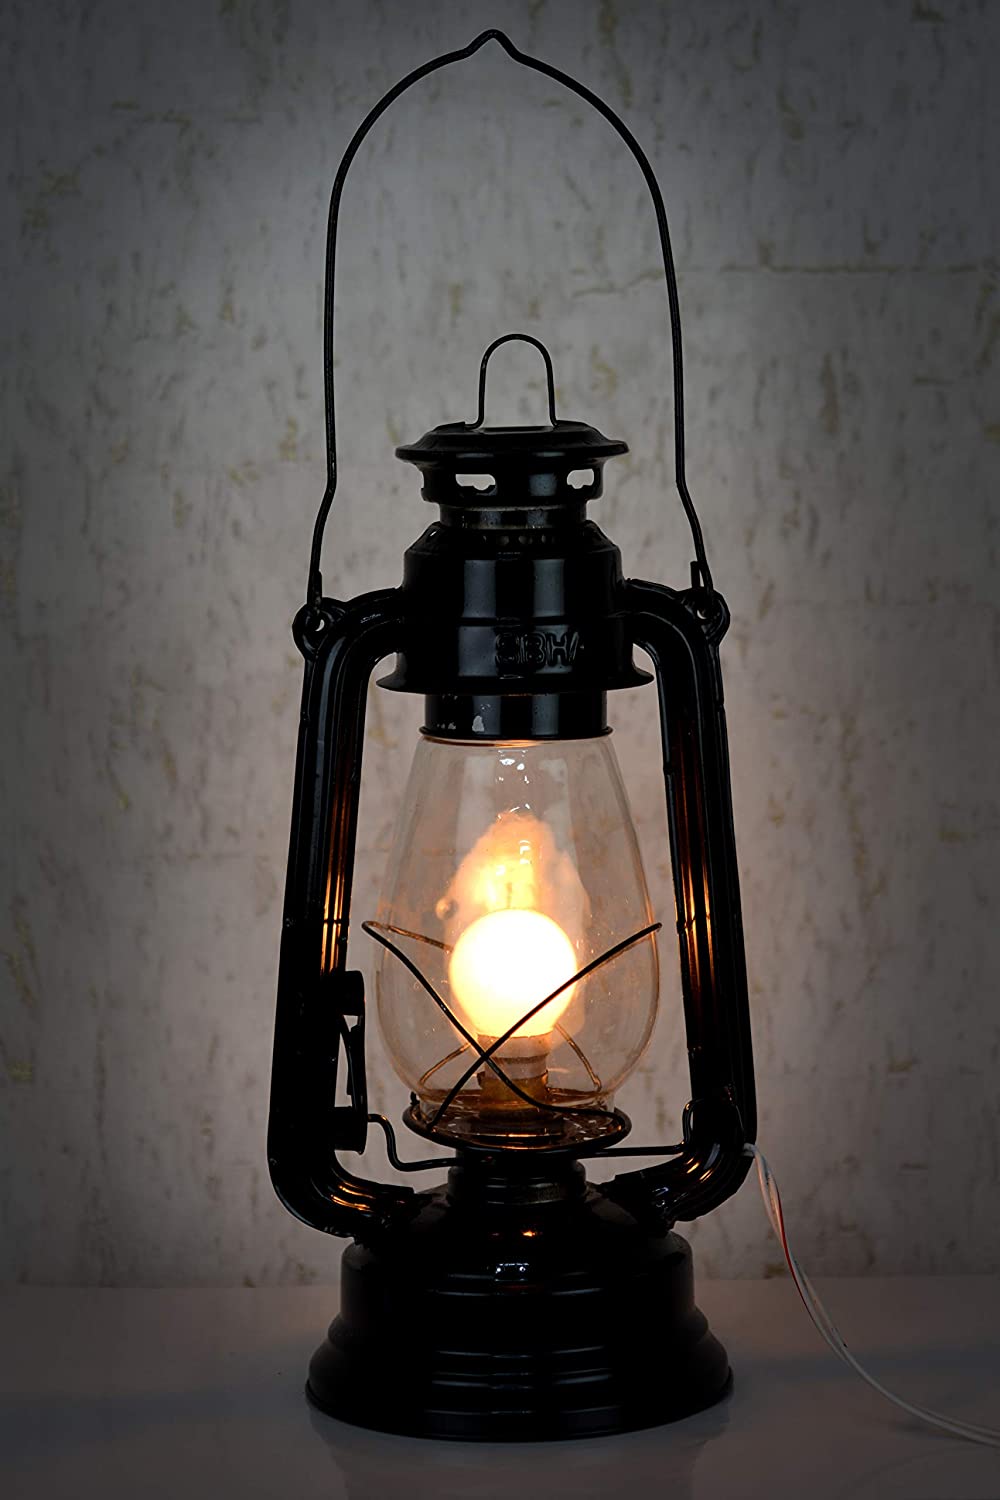 Antique Electric Lantern light for wall Decor / wall hanging Showpiece for Decoration / lantern Light for Diwali Decor 